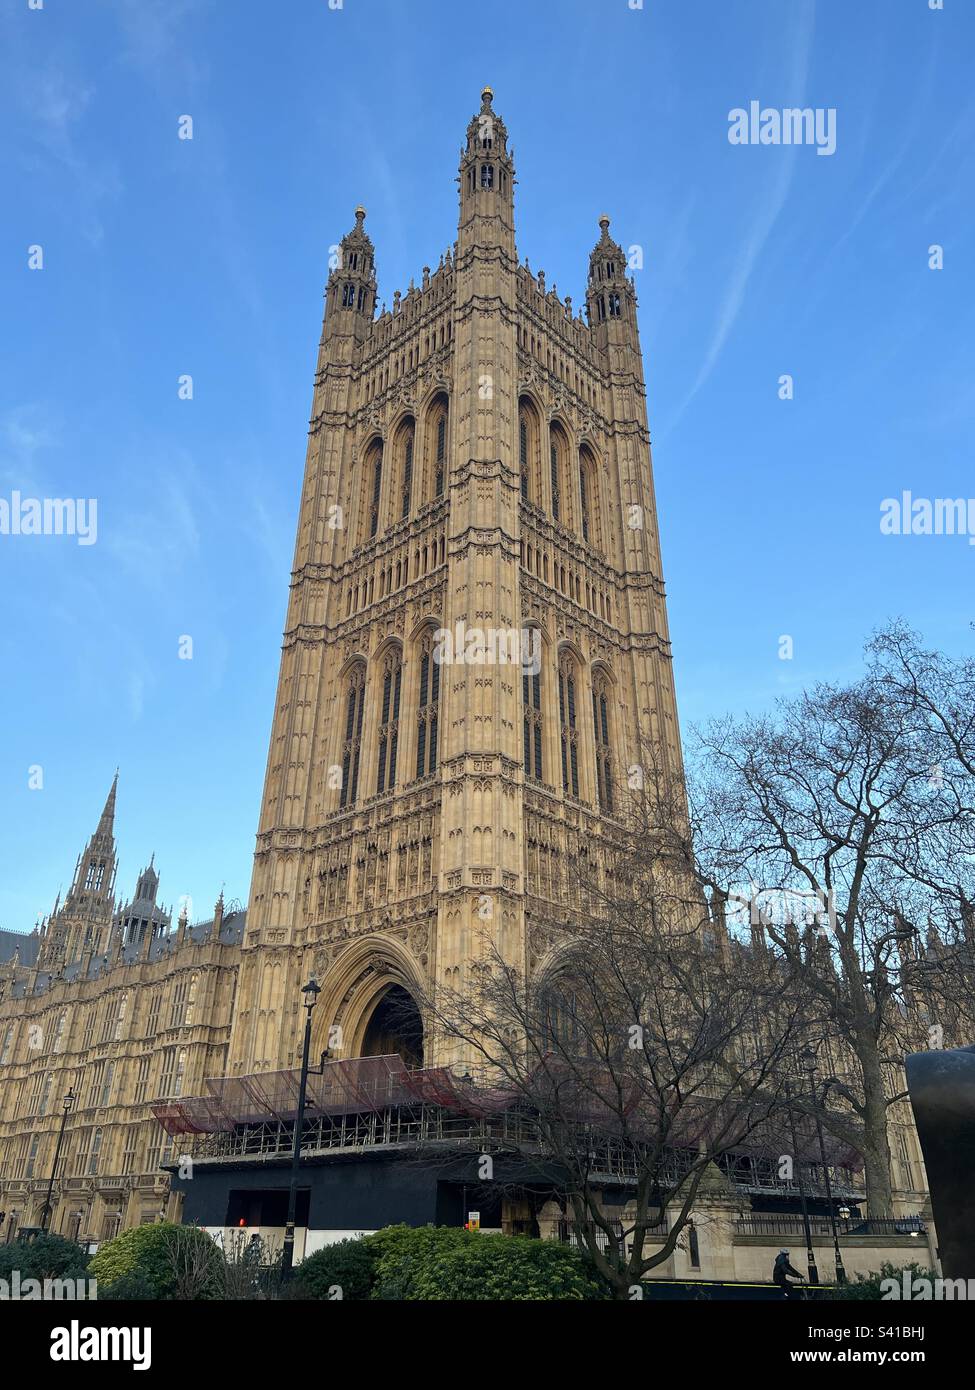 Victoria tower in the Palace of Westminster in the Houses of Parliament, Westminster, London, England, United Kingdom in winter Stock Photo